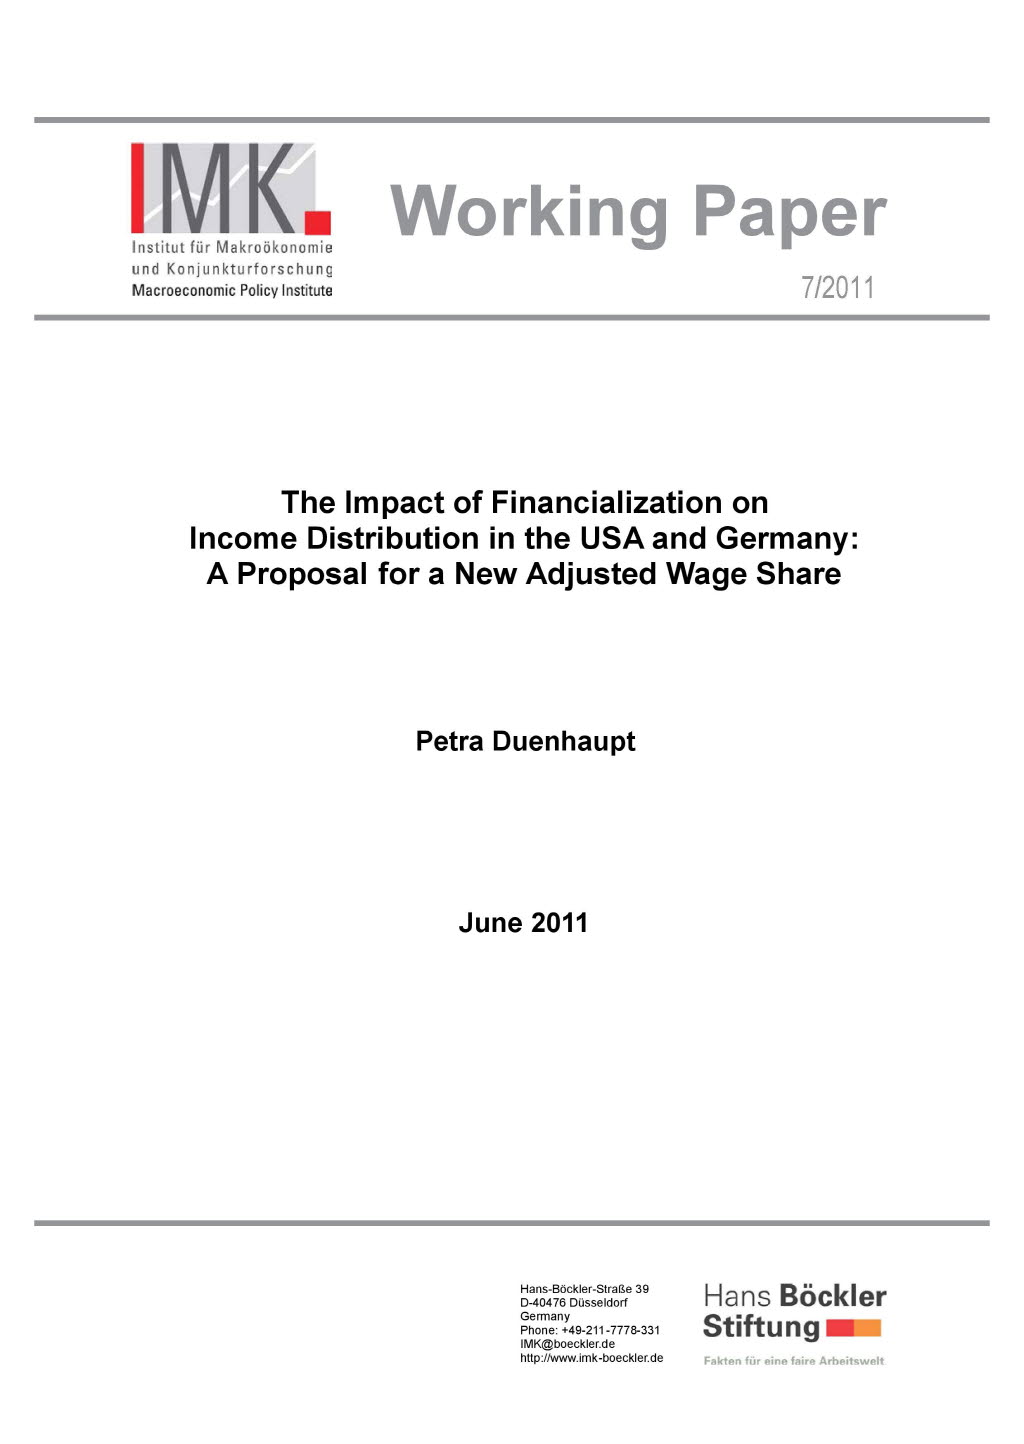 The Impact of Financialization on Income Distribution in the USA and Germany